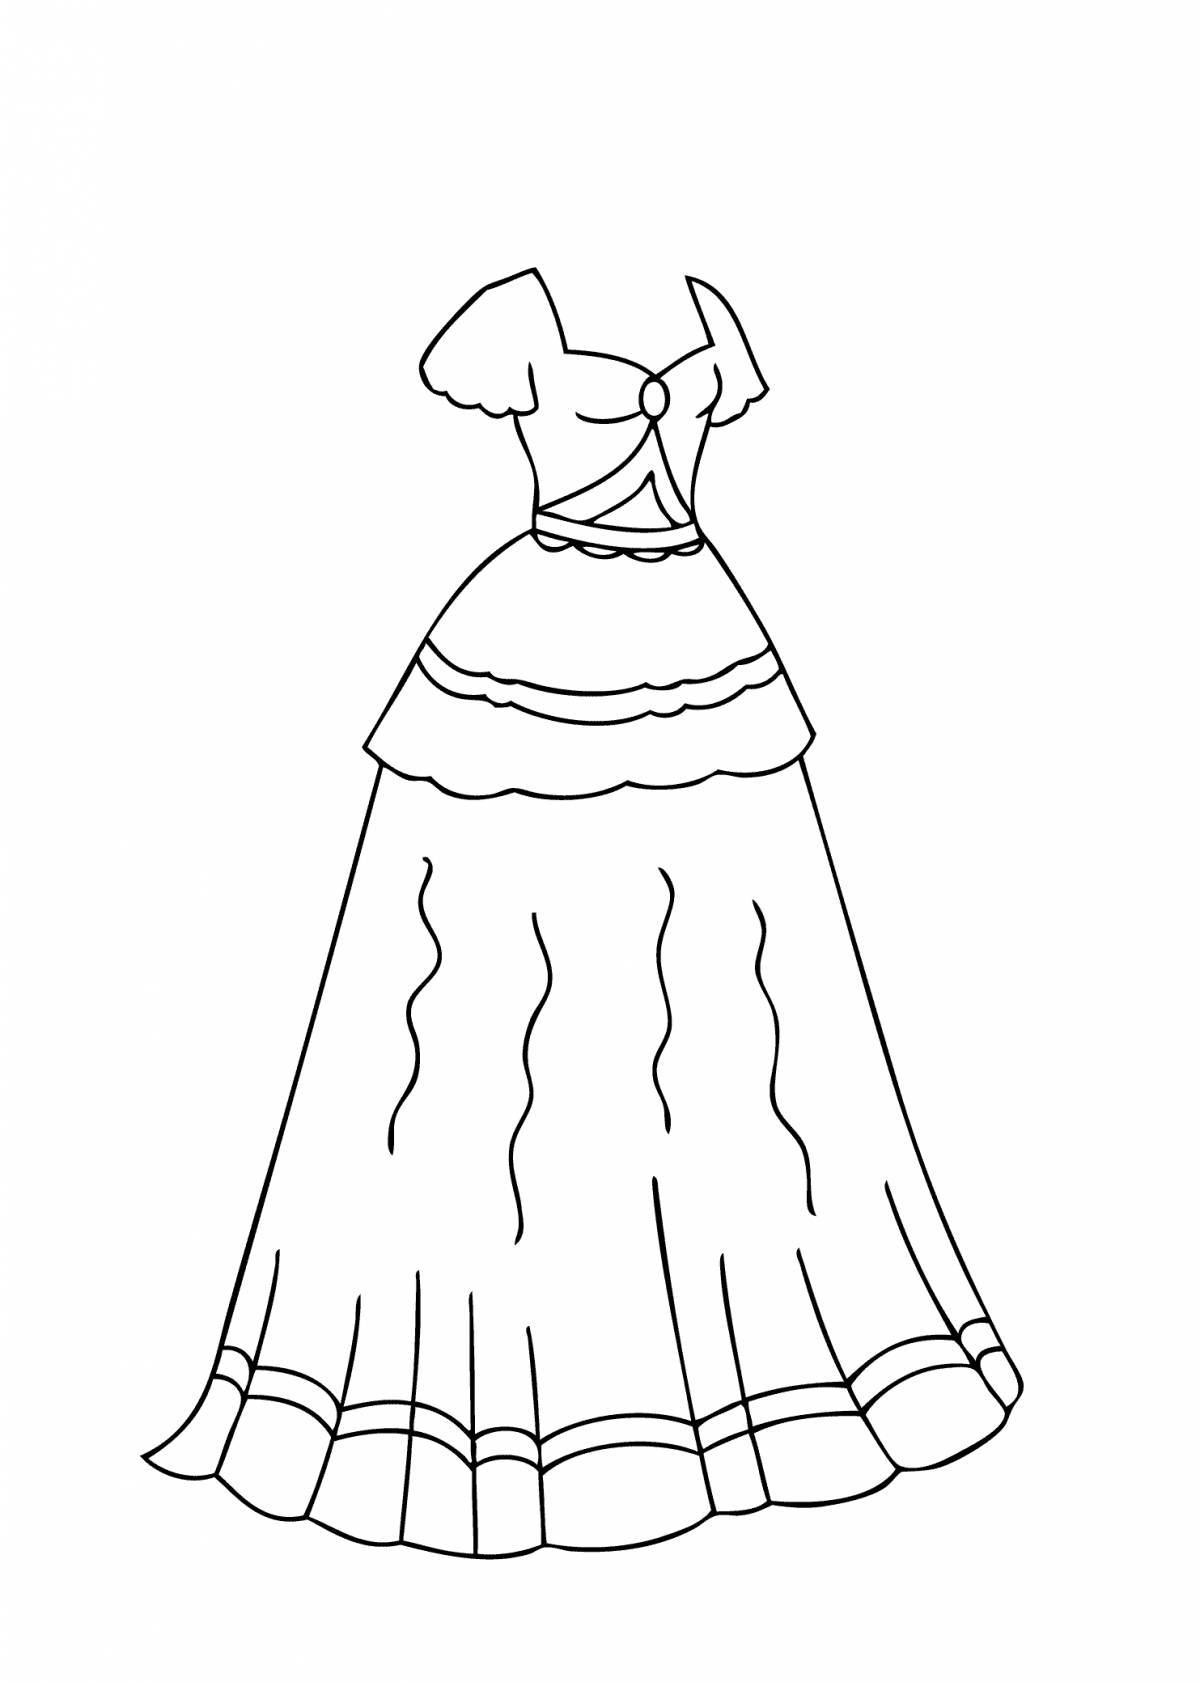 Coloring page glamorous dress for children